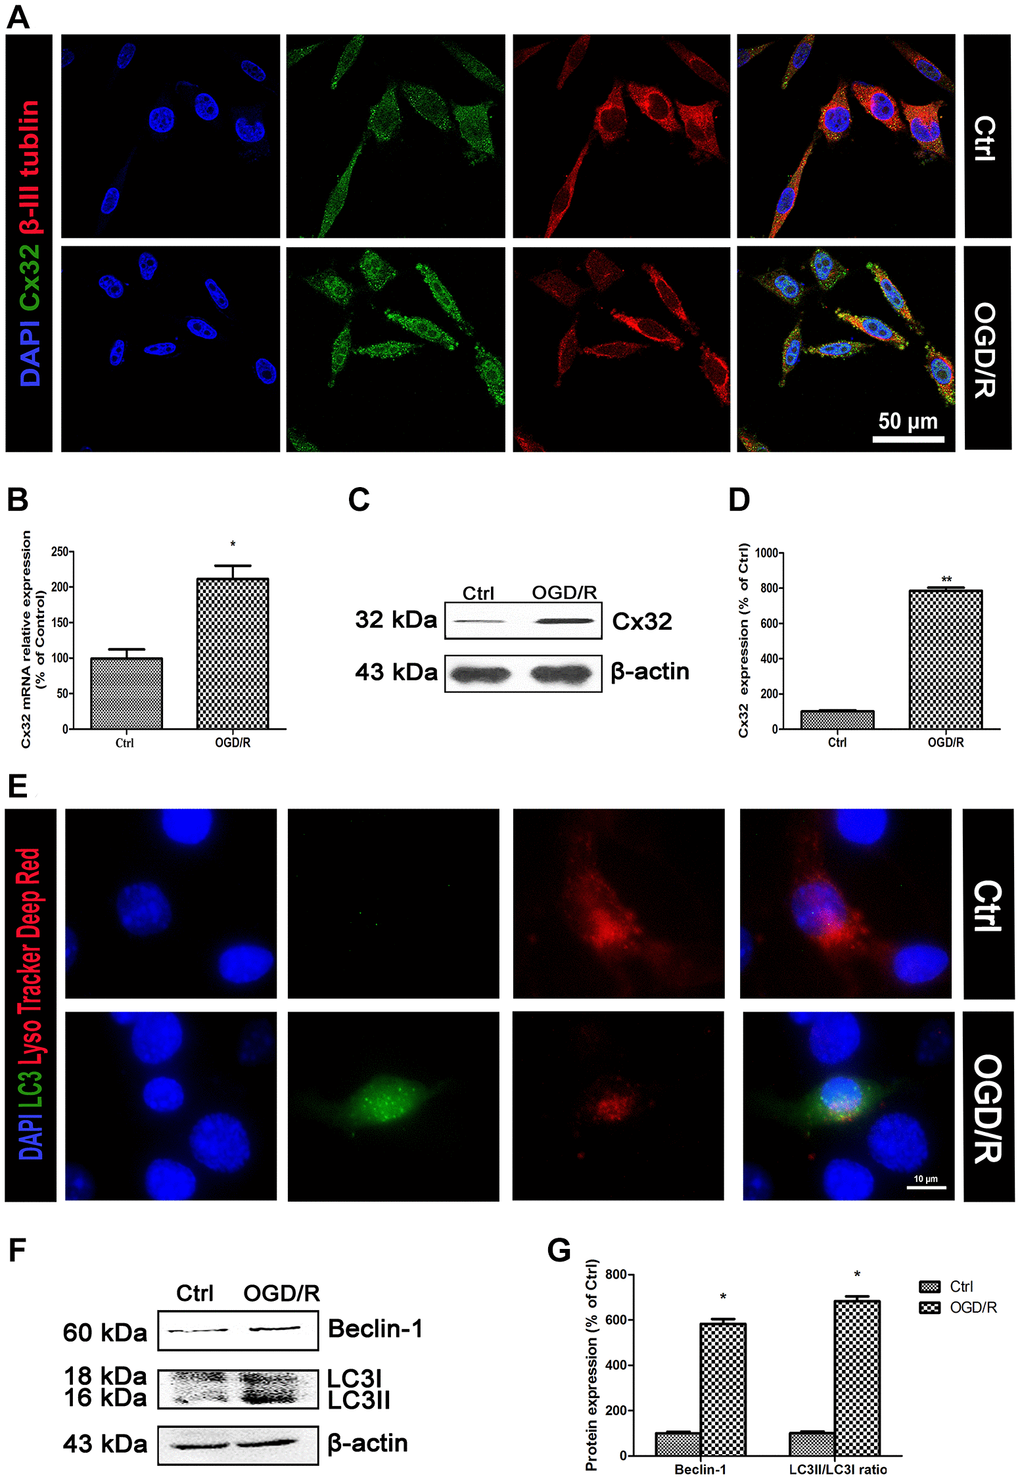 OGD/R induced up-regulation of Cx32 expression and activation of autophagy. (A) Double labeling of Cx32 and β-tubulin in the Ctrl or OGD/R (2h OGD following 24 h recovery) group. Scale bars, 50 μm. (B) The mRNA level of Cx32 was detected by qPCR. (C–D) Representative bands of Cx32 protein in the cells after OGD/R. (E) The autophagosome was labeled with LC3 (green), autophagolysosome was marked by LysoTracker probes (red), and cell nuclei were counterstained by DAPI (blue). Scale bars, 20 μm. (F–G) Representative bands of Beclin1 and LC3 protein in SH-SY5Y cells after OGD/R. Variation in protein loading was determined by blotting with an anti-β-actin antibody. Densitometric scanning of band intensities were calculated as means ± SD (n = 3). *p **p 